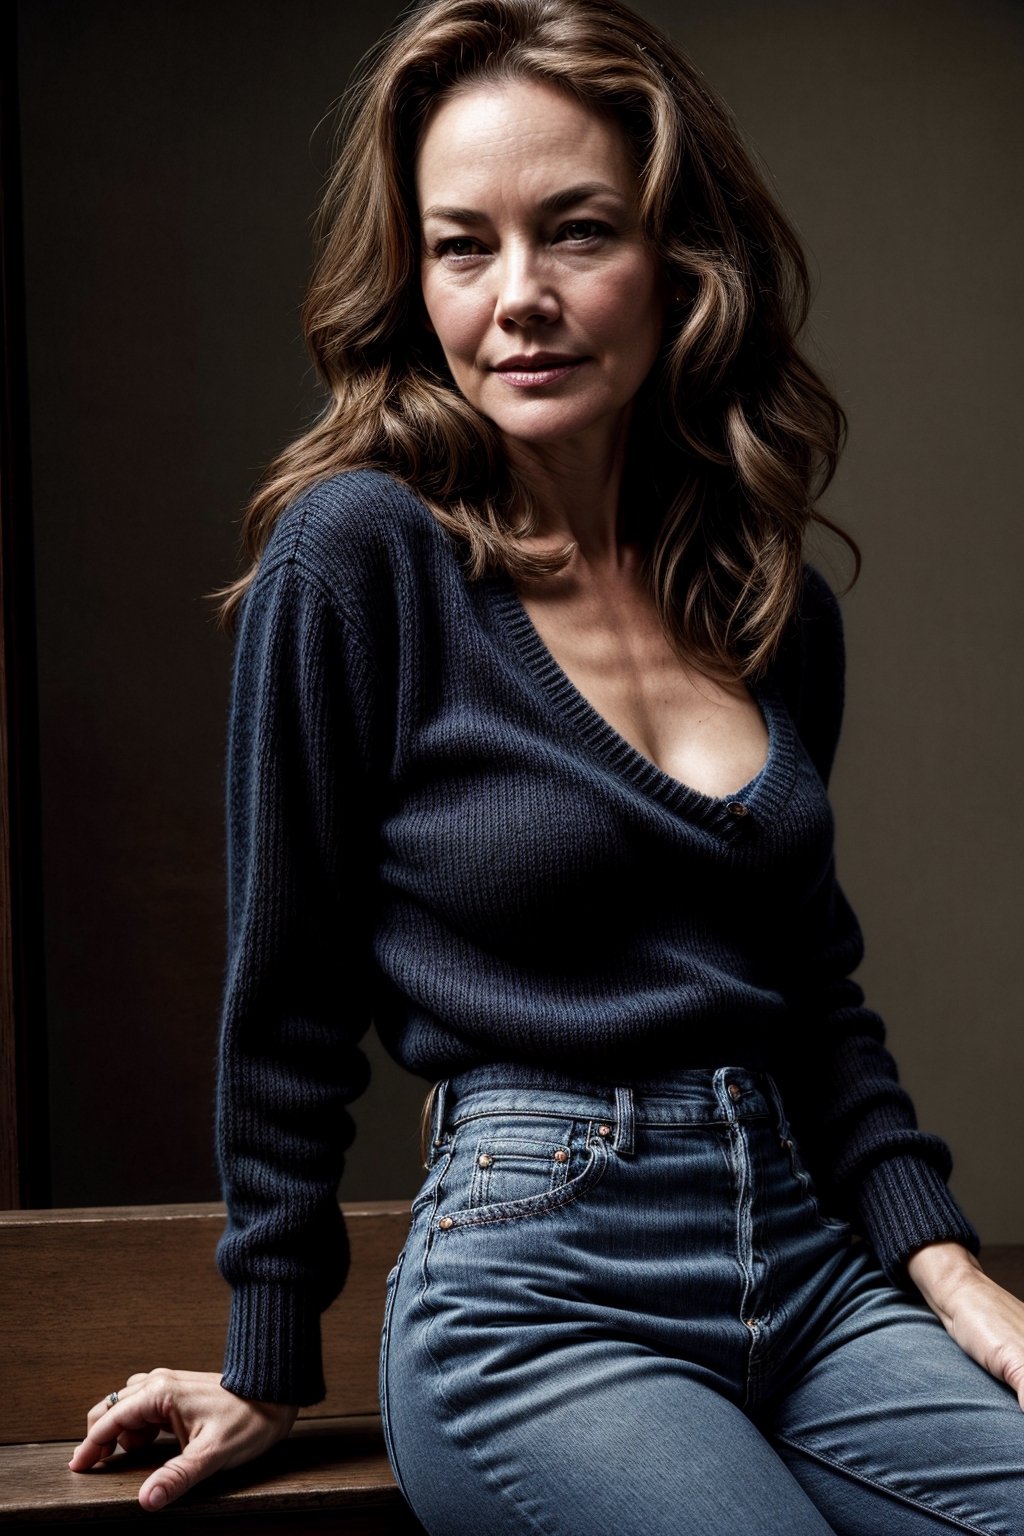 Photorealistic, young Diane Lane, facial portrait, sexy stare, smirked, black top sweater, blue jeans, butt shot 